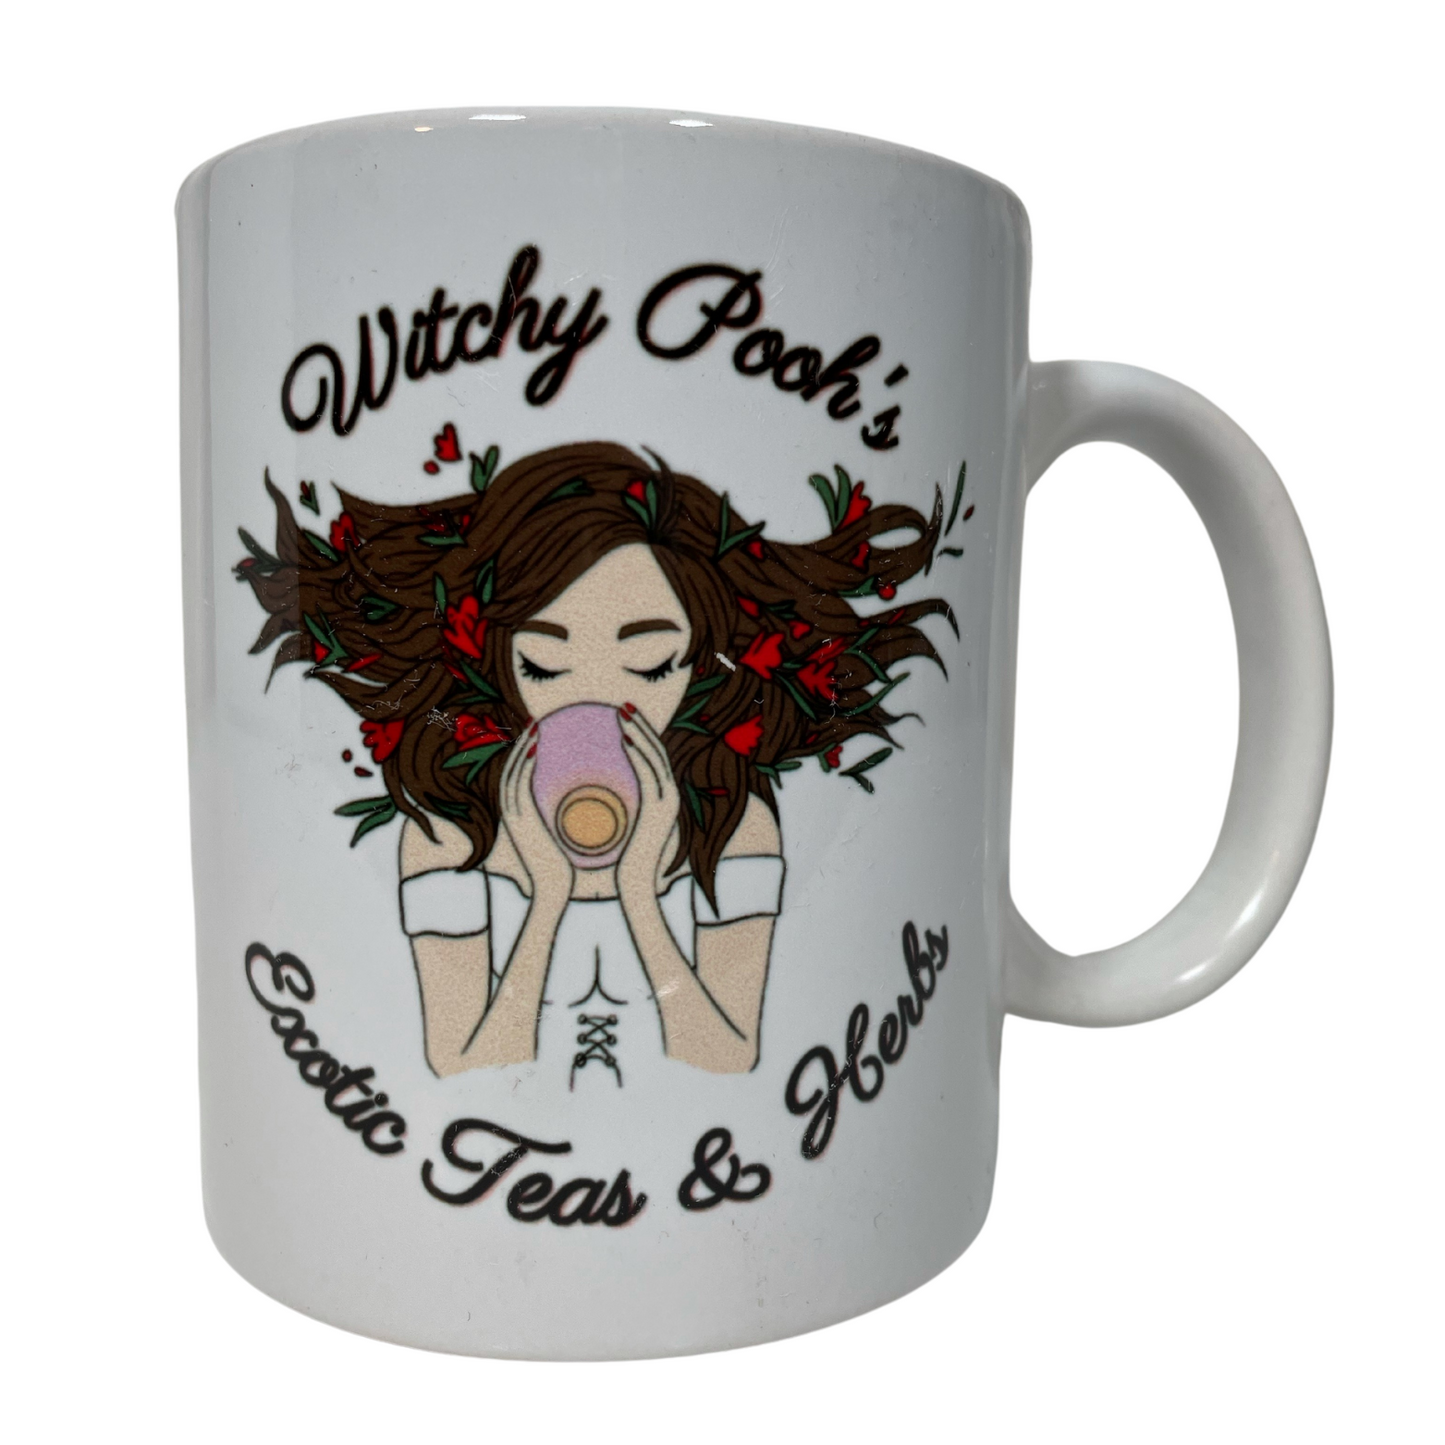 Witchy Pooh's Mugs, White Coffee Cup with The Witchy Pooh Logo